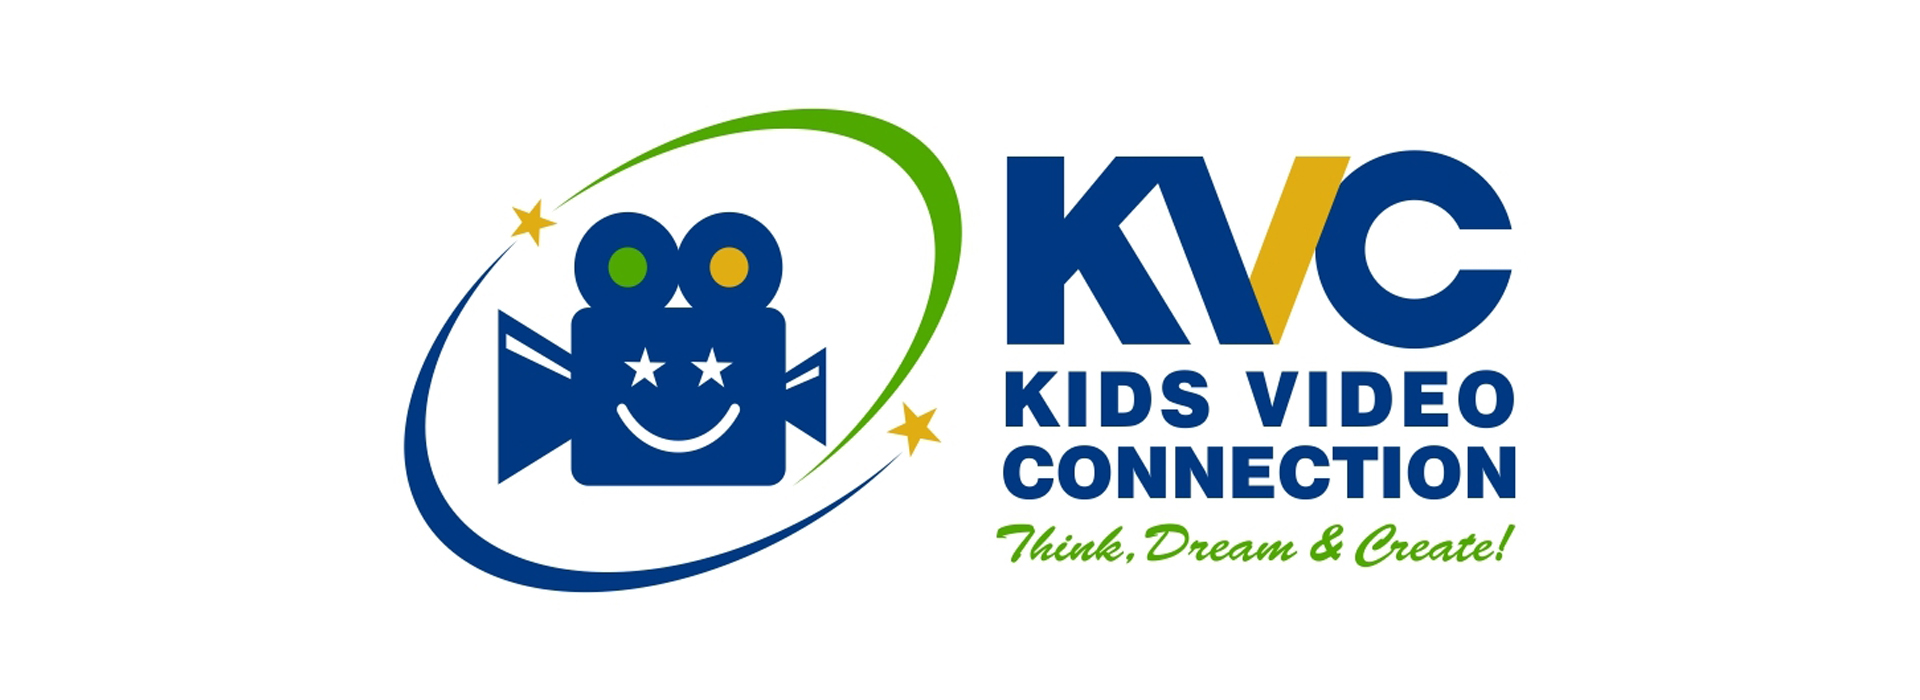 To bring awareness and to help combat these problems, KVC teaches youth media literacy and trains the next generation of content creators!